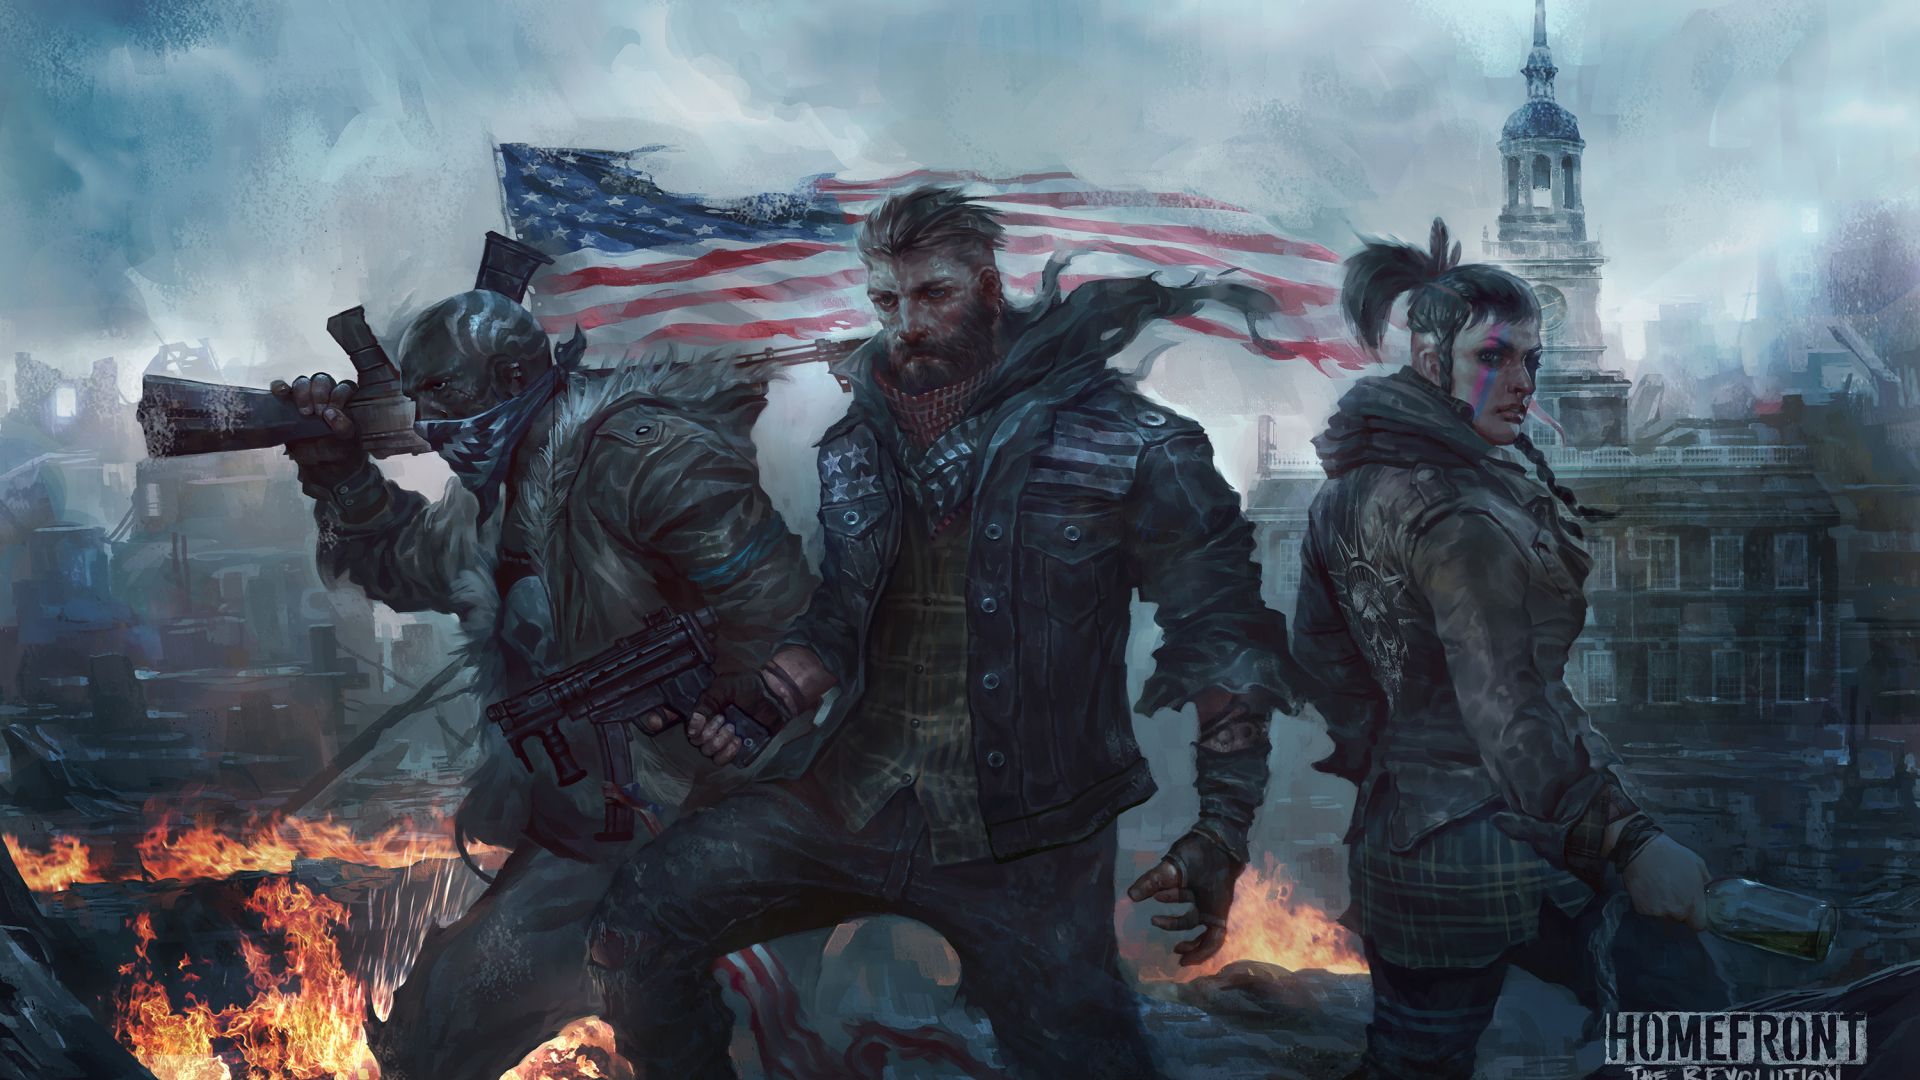 Wallpaper Homefront: The Revolution, video game, soldiers